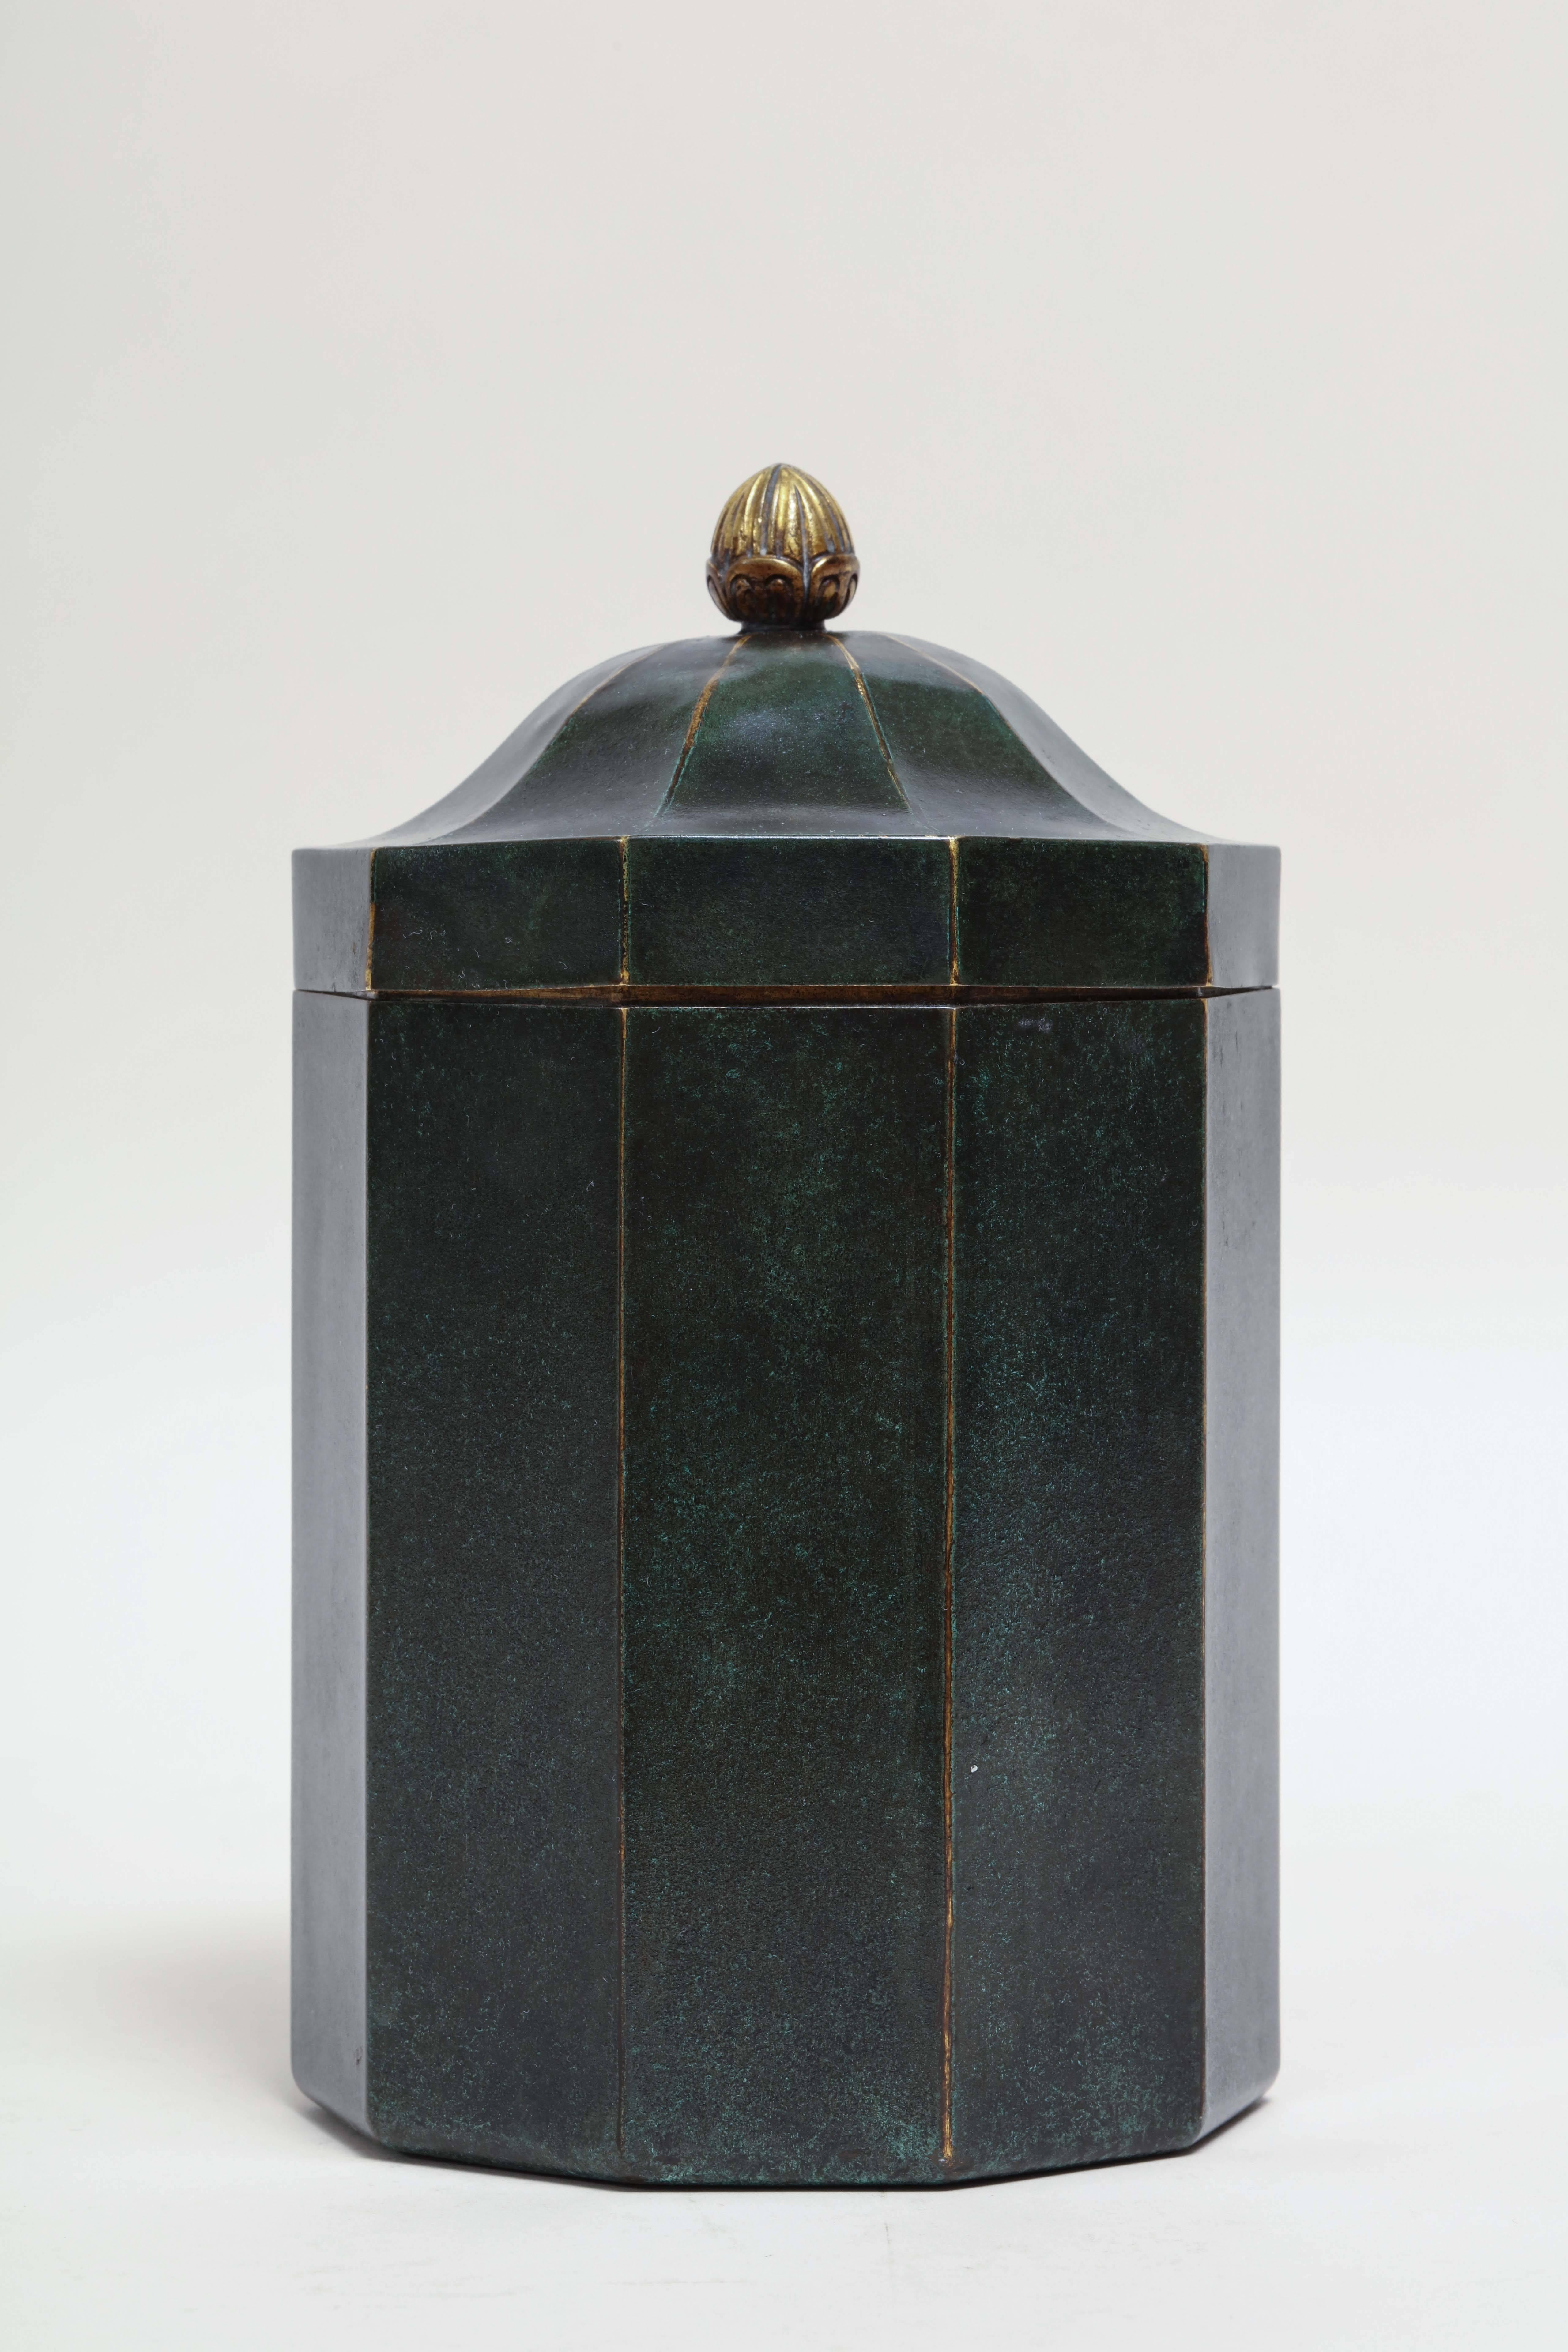 Model created for the Exposition des Arts Decoratifs, Paris, 1925.

Ten-sided brass box with green and gold patina.

With a lid with a gilded stylized grain-shaped finial and gilded interior.
Impressed CHRISTOFLE/ B27/ F.

Literature:
“le